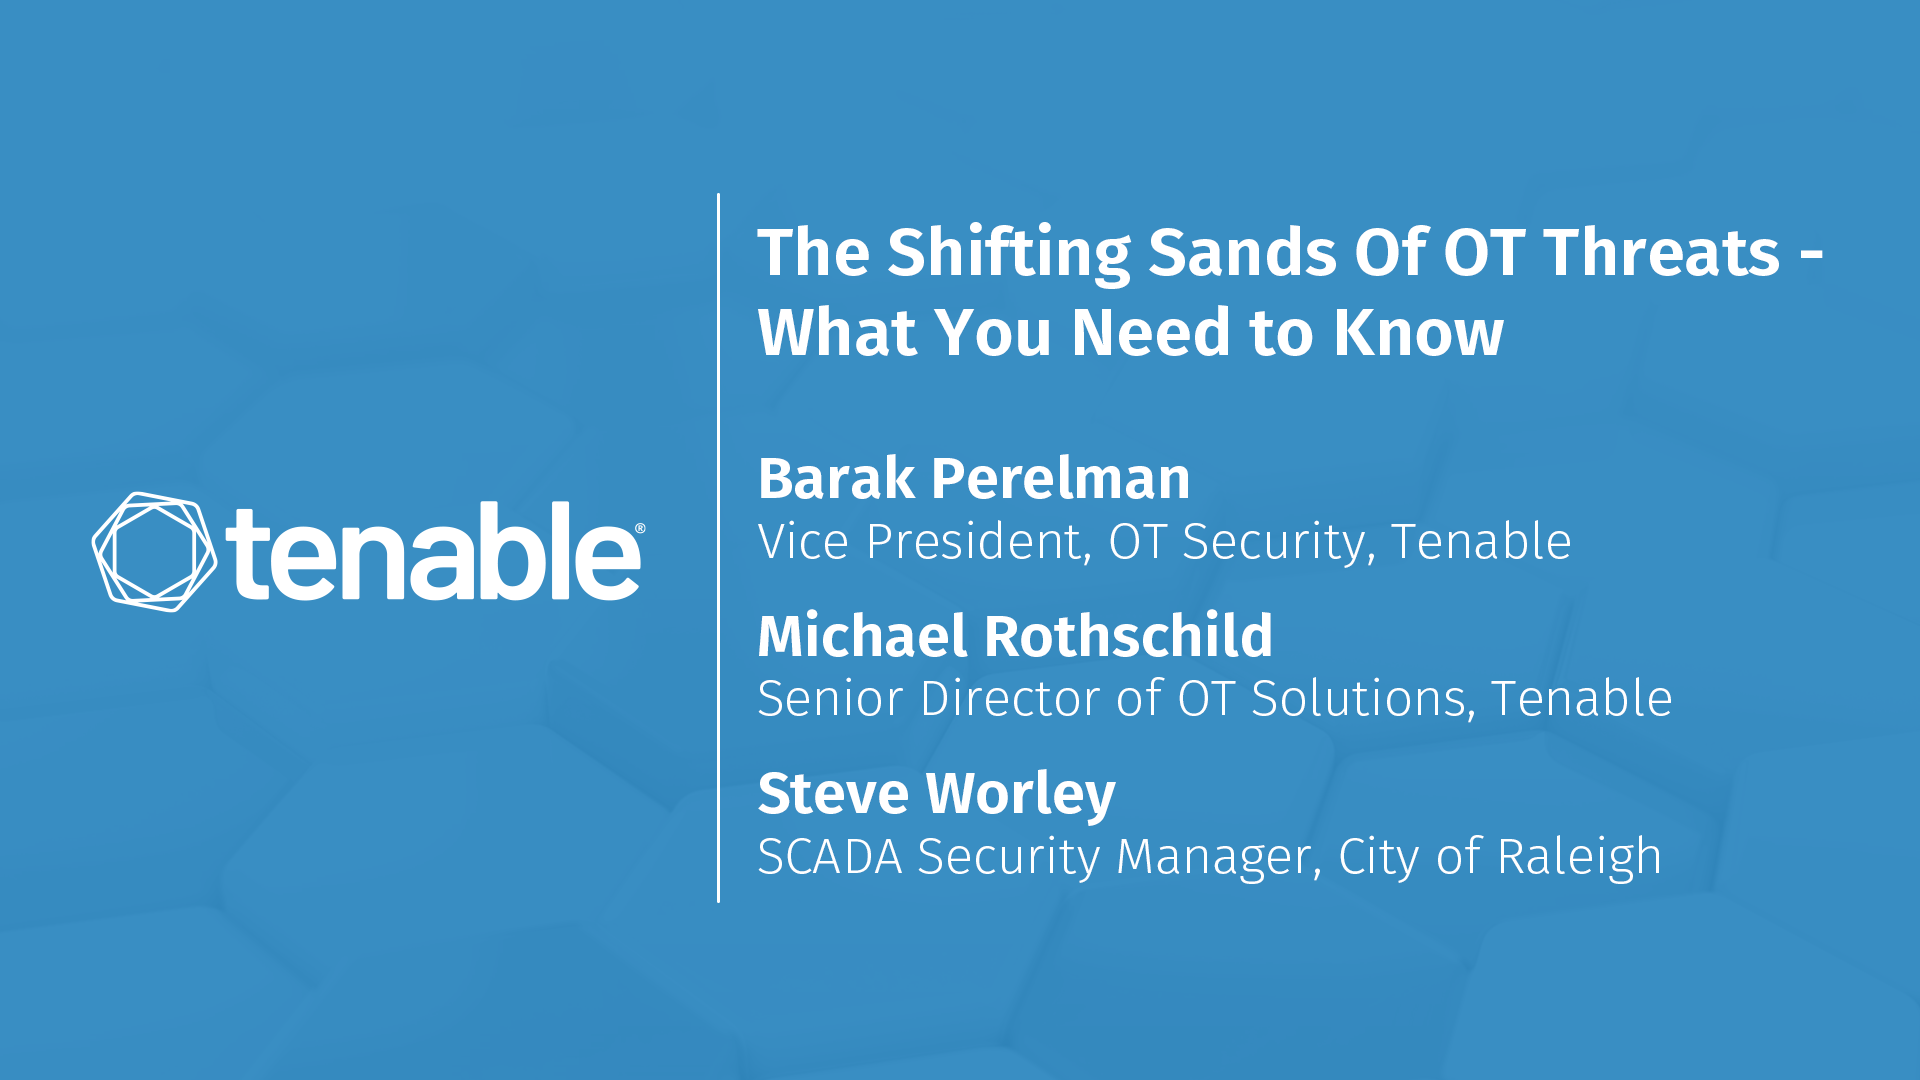 The Shifting Sands Of OT Threats: What You Need to Know